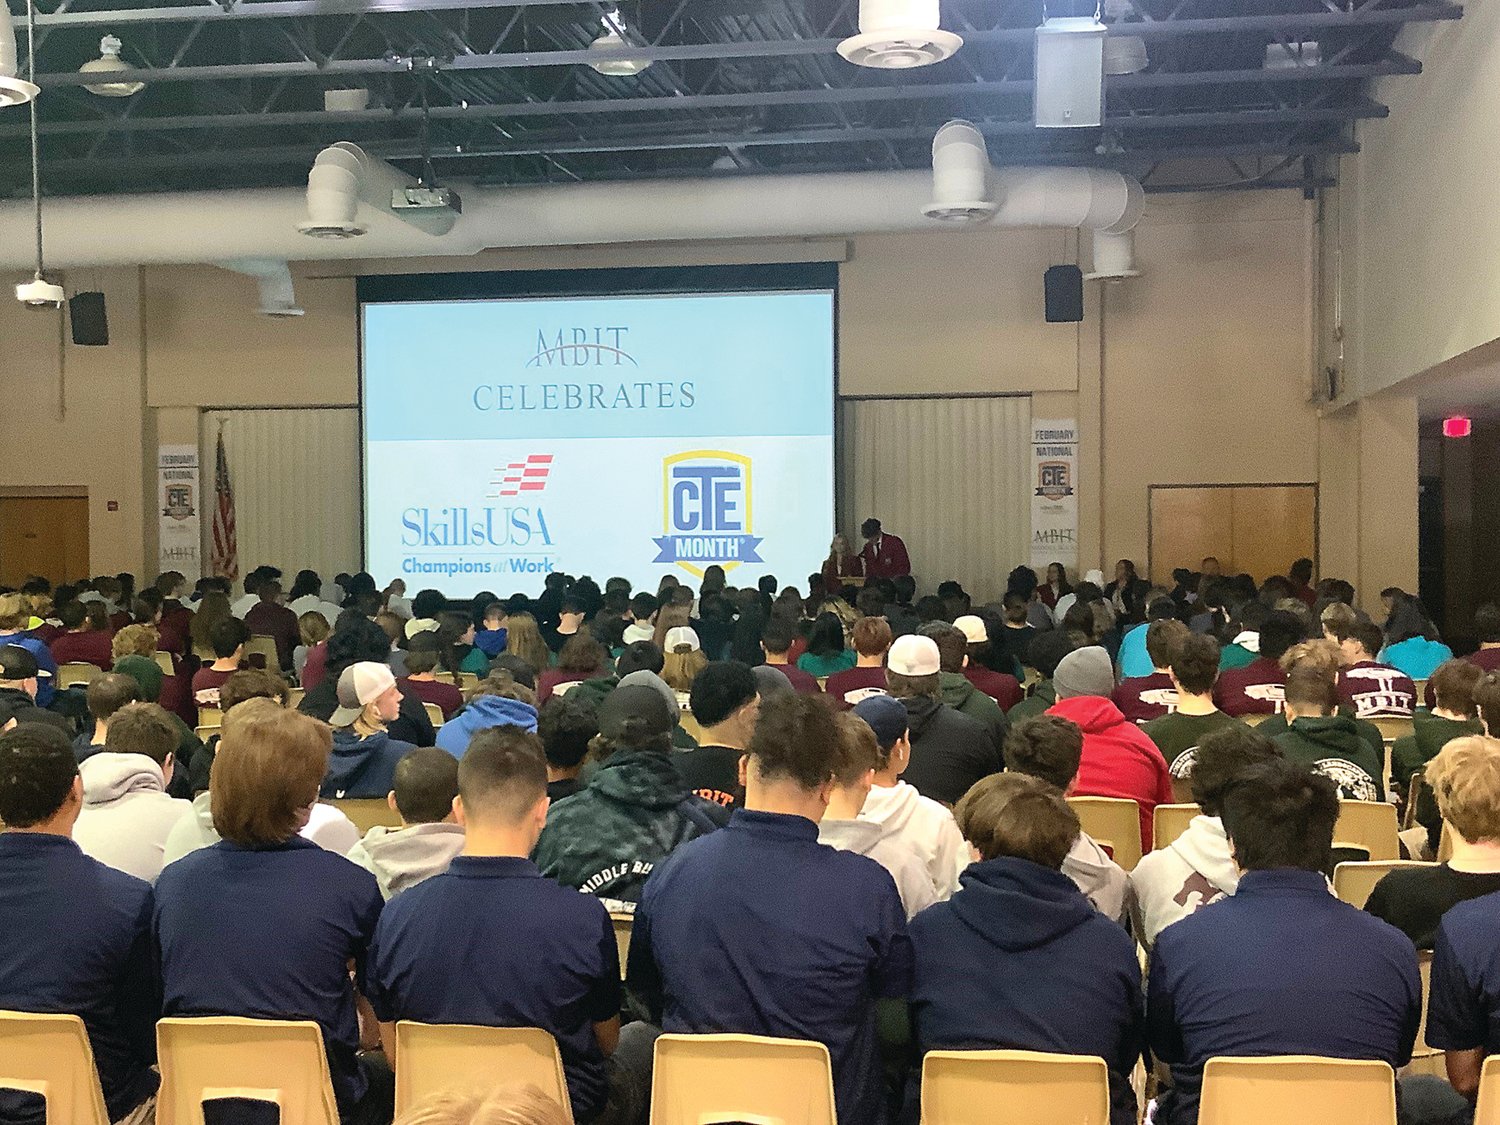 The students and faculty of Middle Bucks Institute of Technology recently gathered to celebrate the achievements of the SkillsUSA District 2 competitors and to recognize the importance of Career and Technical Education during CTE Month.